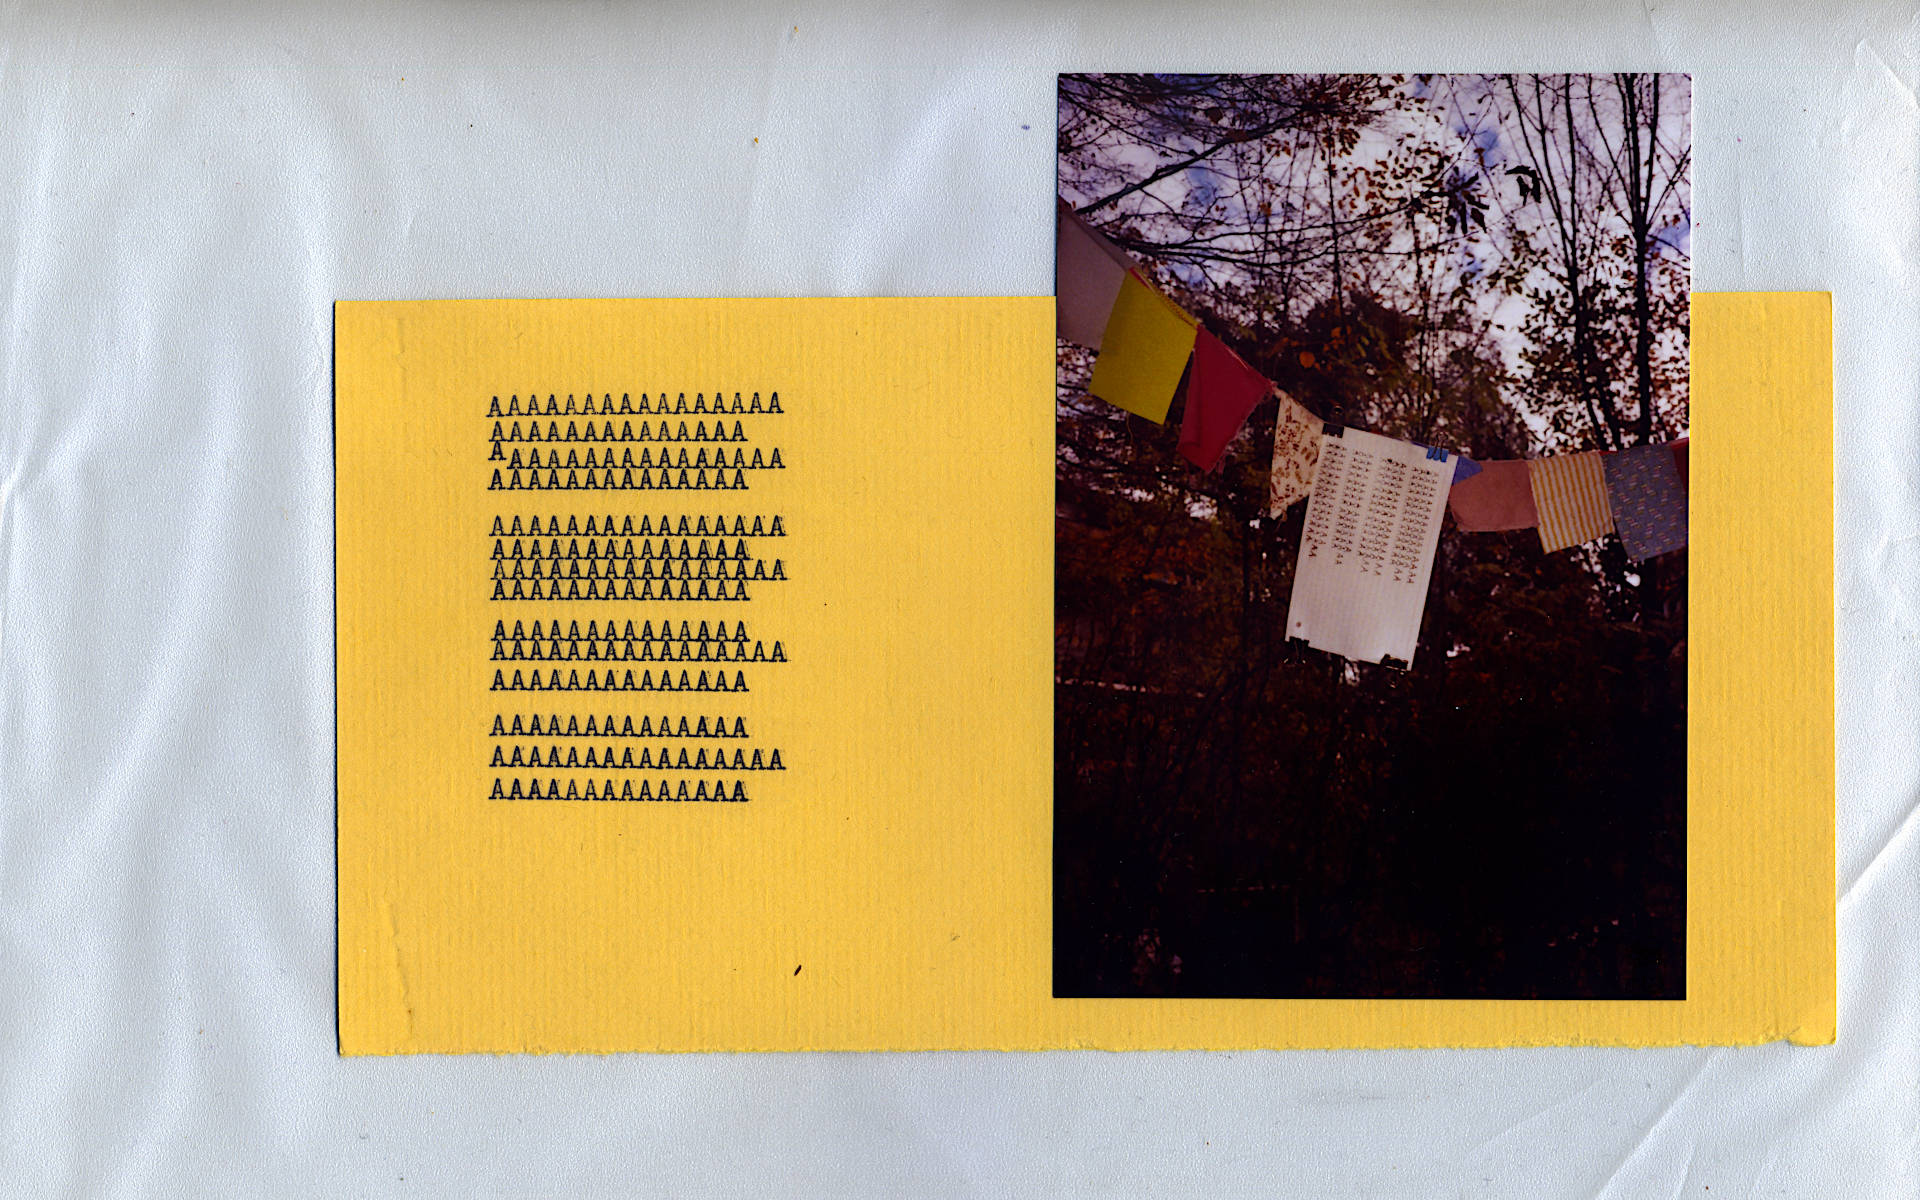 two versions of a wet and dried sonnet. Yellow cardboard with typewriter written poem and a photographic picture of the drying process of a previous version on paper